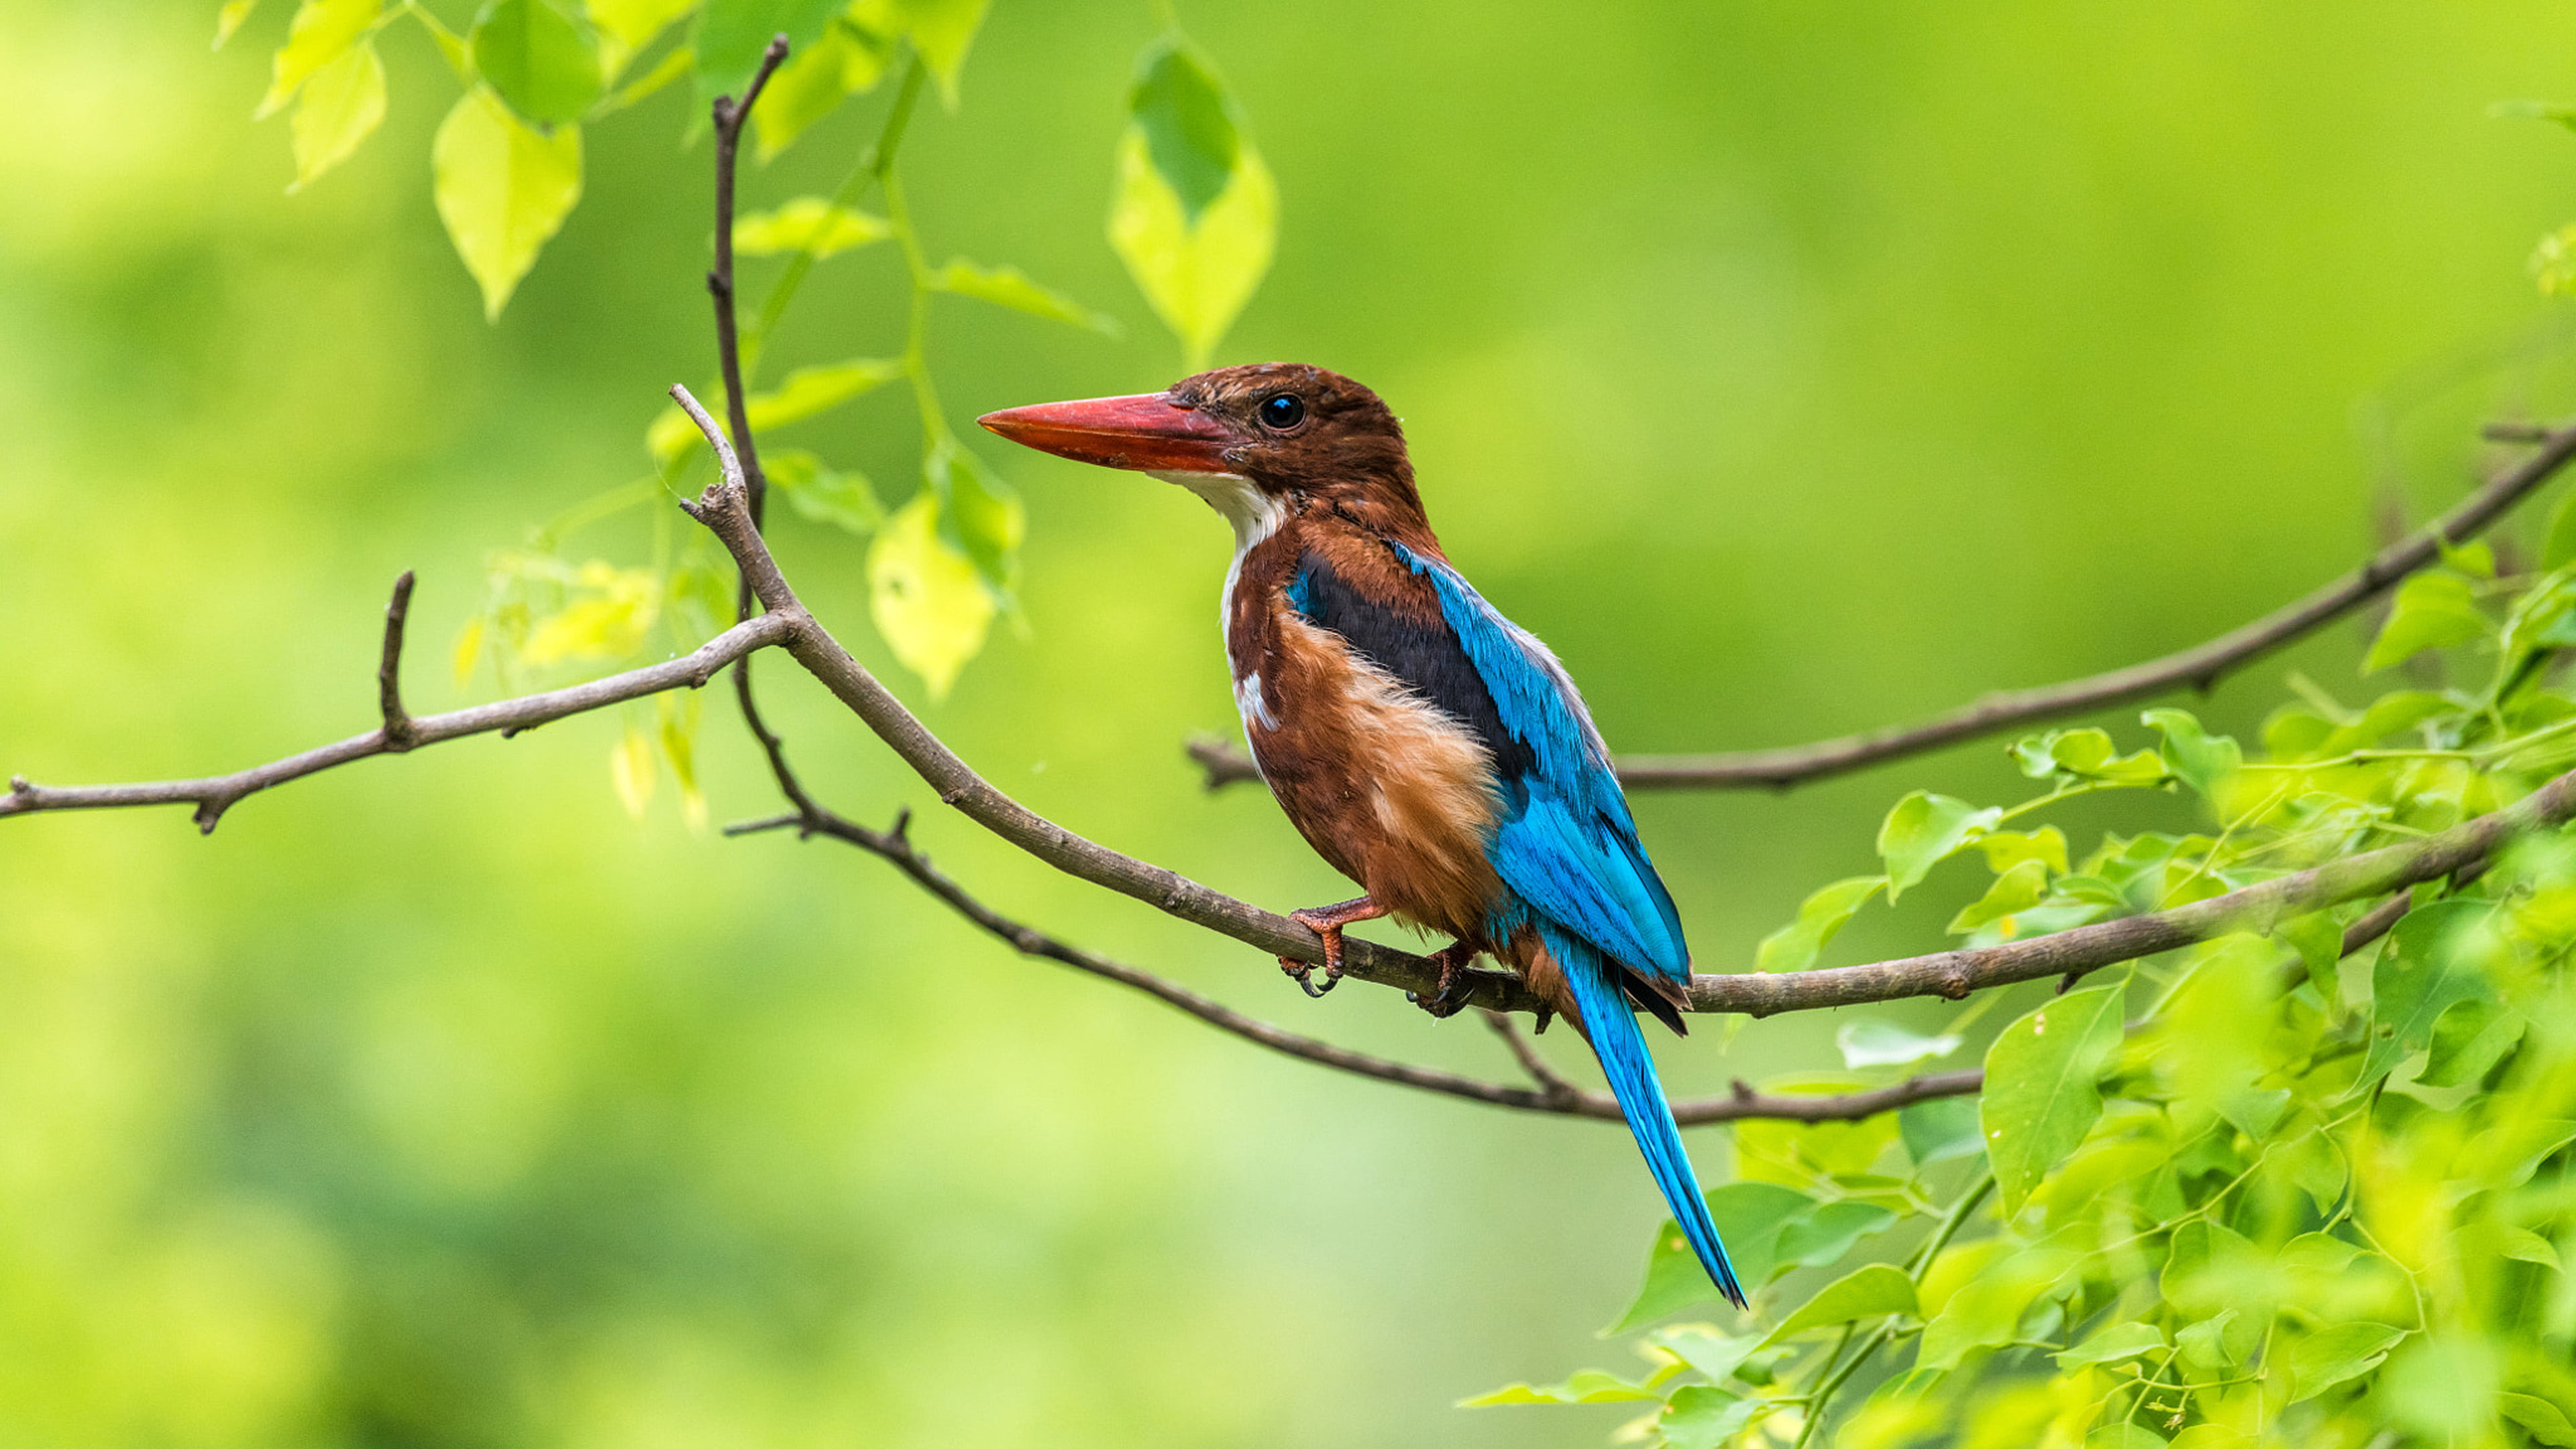 Birds Kingfisher Hues Of A Hunter From India 4k Ultra Hd Tv Wallpaper For Desktop Laptop Tablet And Mobile Phones 3840×2160